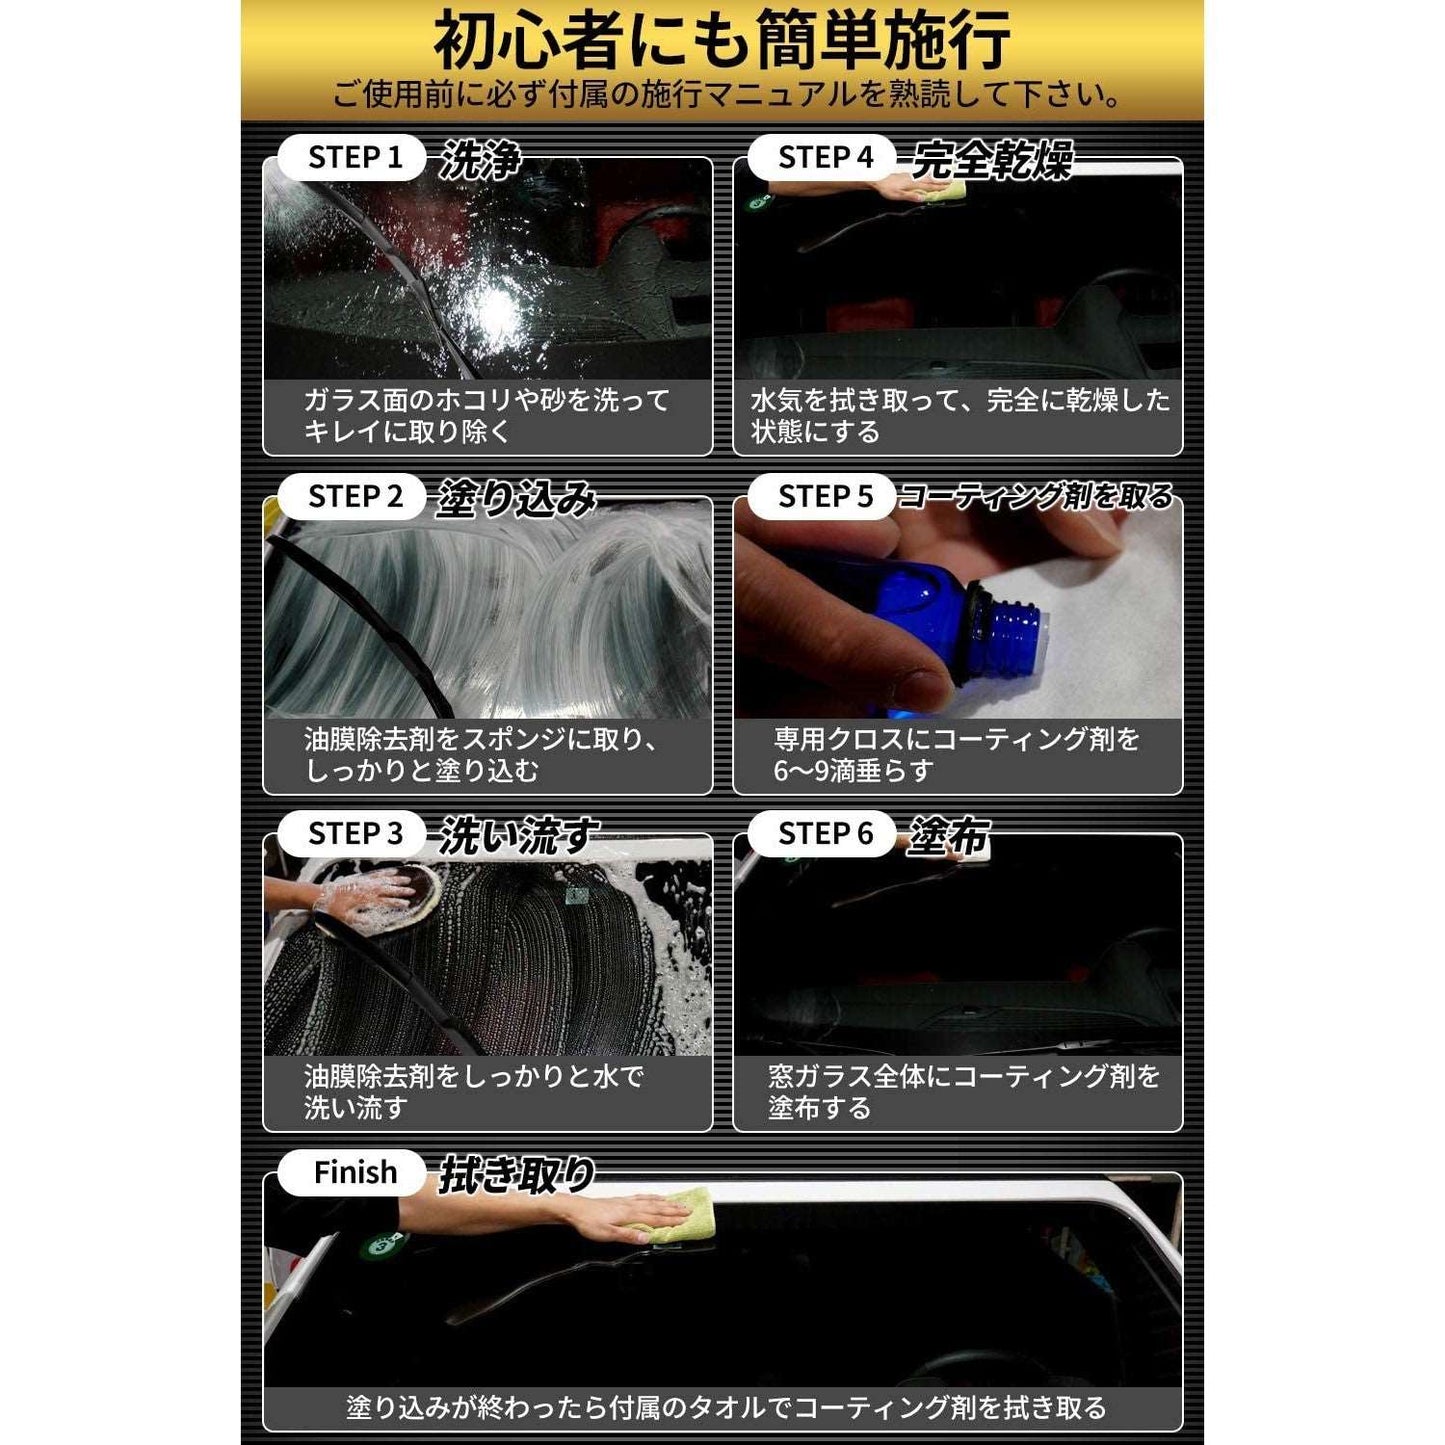 CarZoot Car Glass Water Repellent Window Coating (Made in Japan)